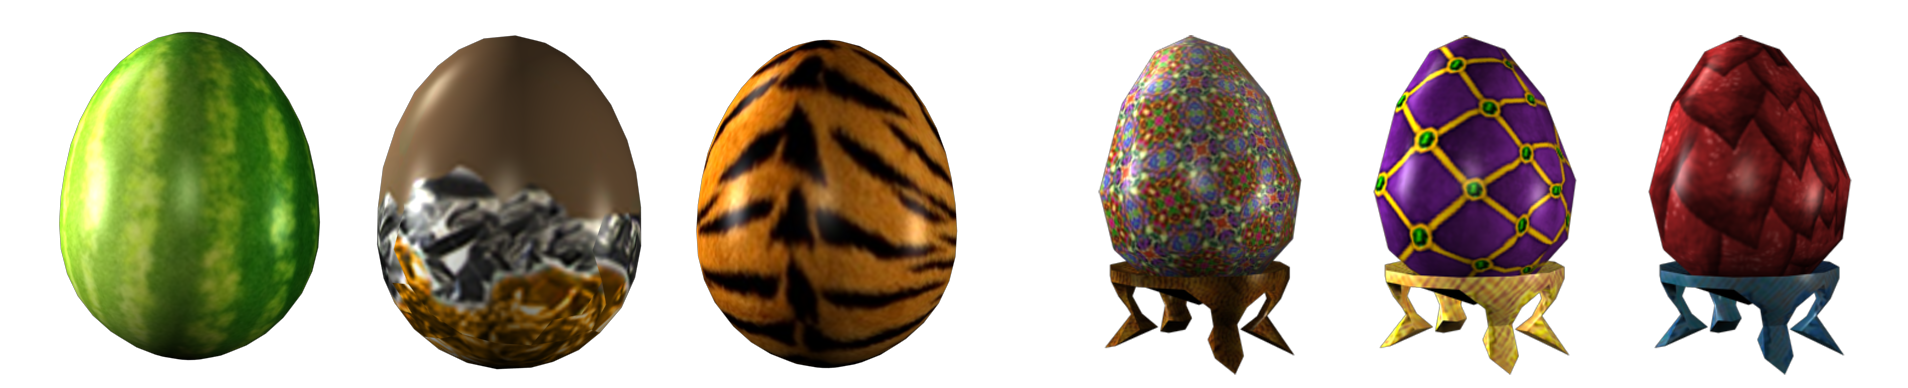 Presenting The Winners Of The Egg And Face Design Contests Roblox Blog - roblox design it winner